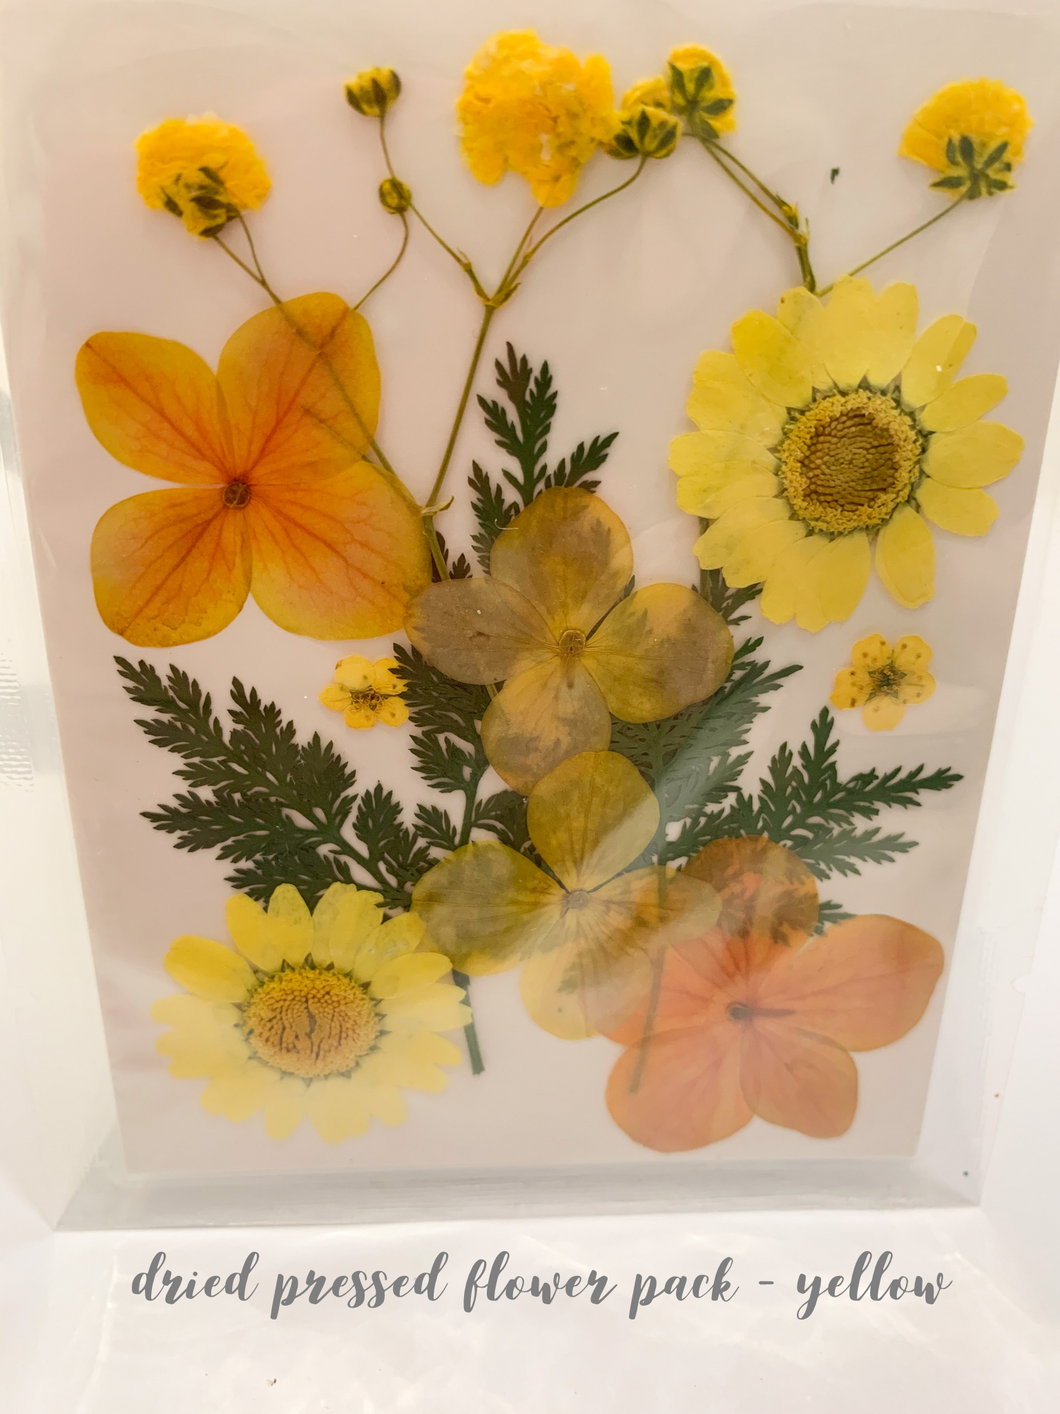 Small Dried Pressed Flower Pack - Yellow